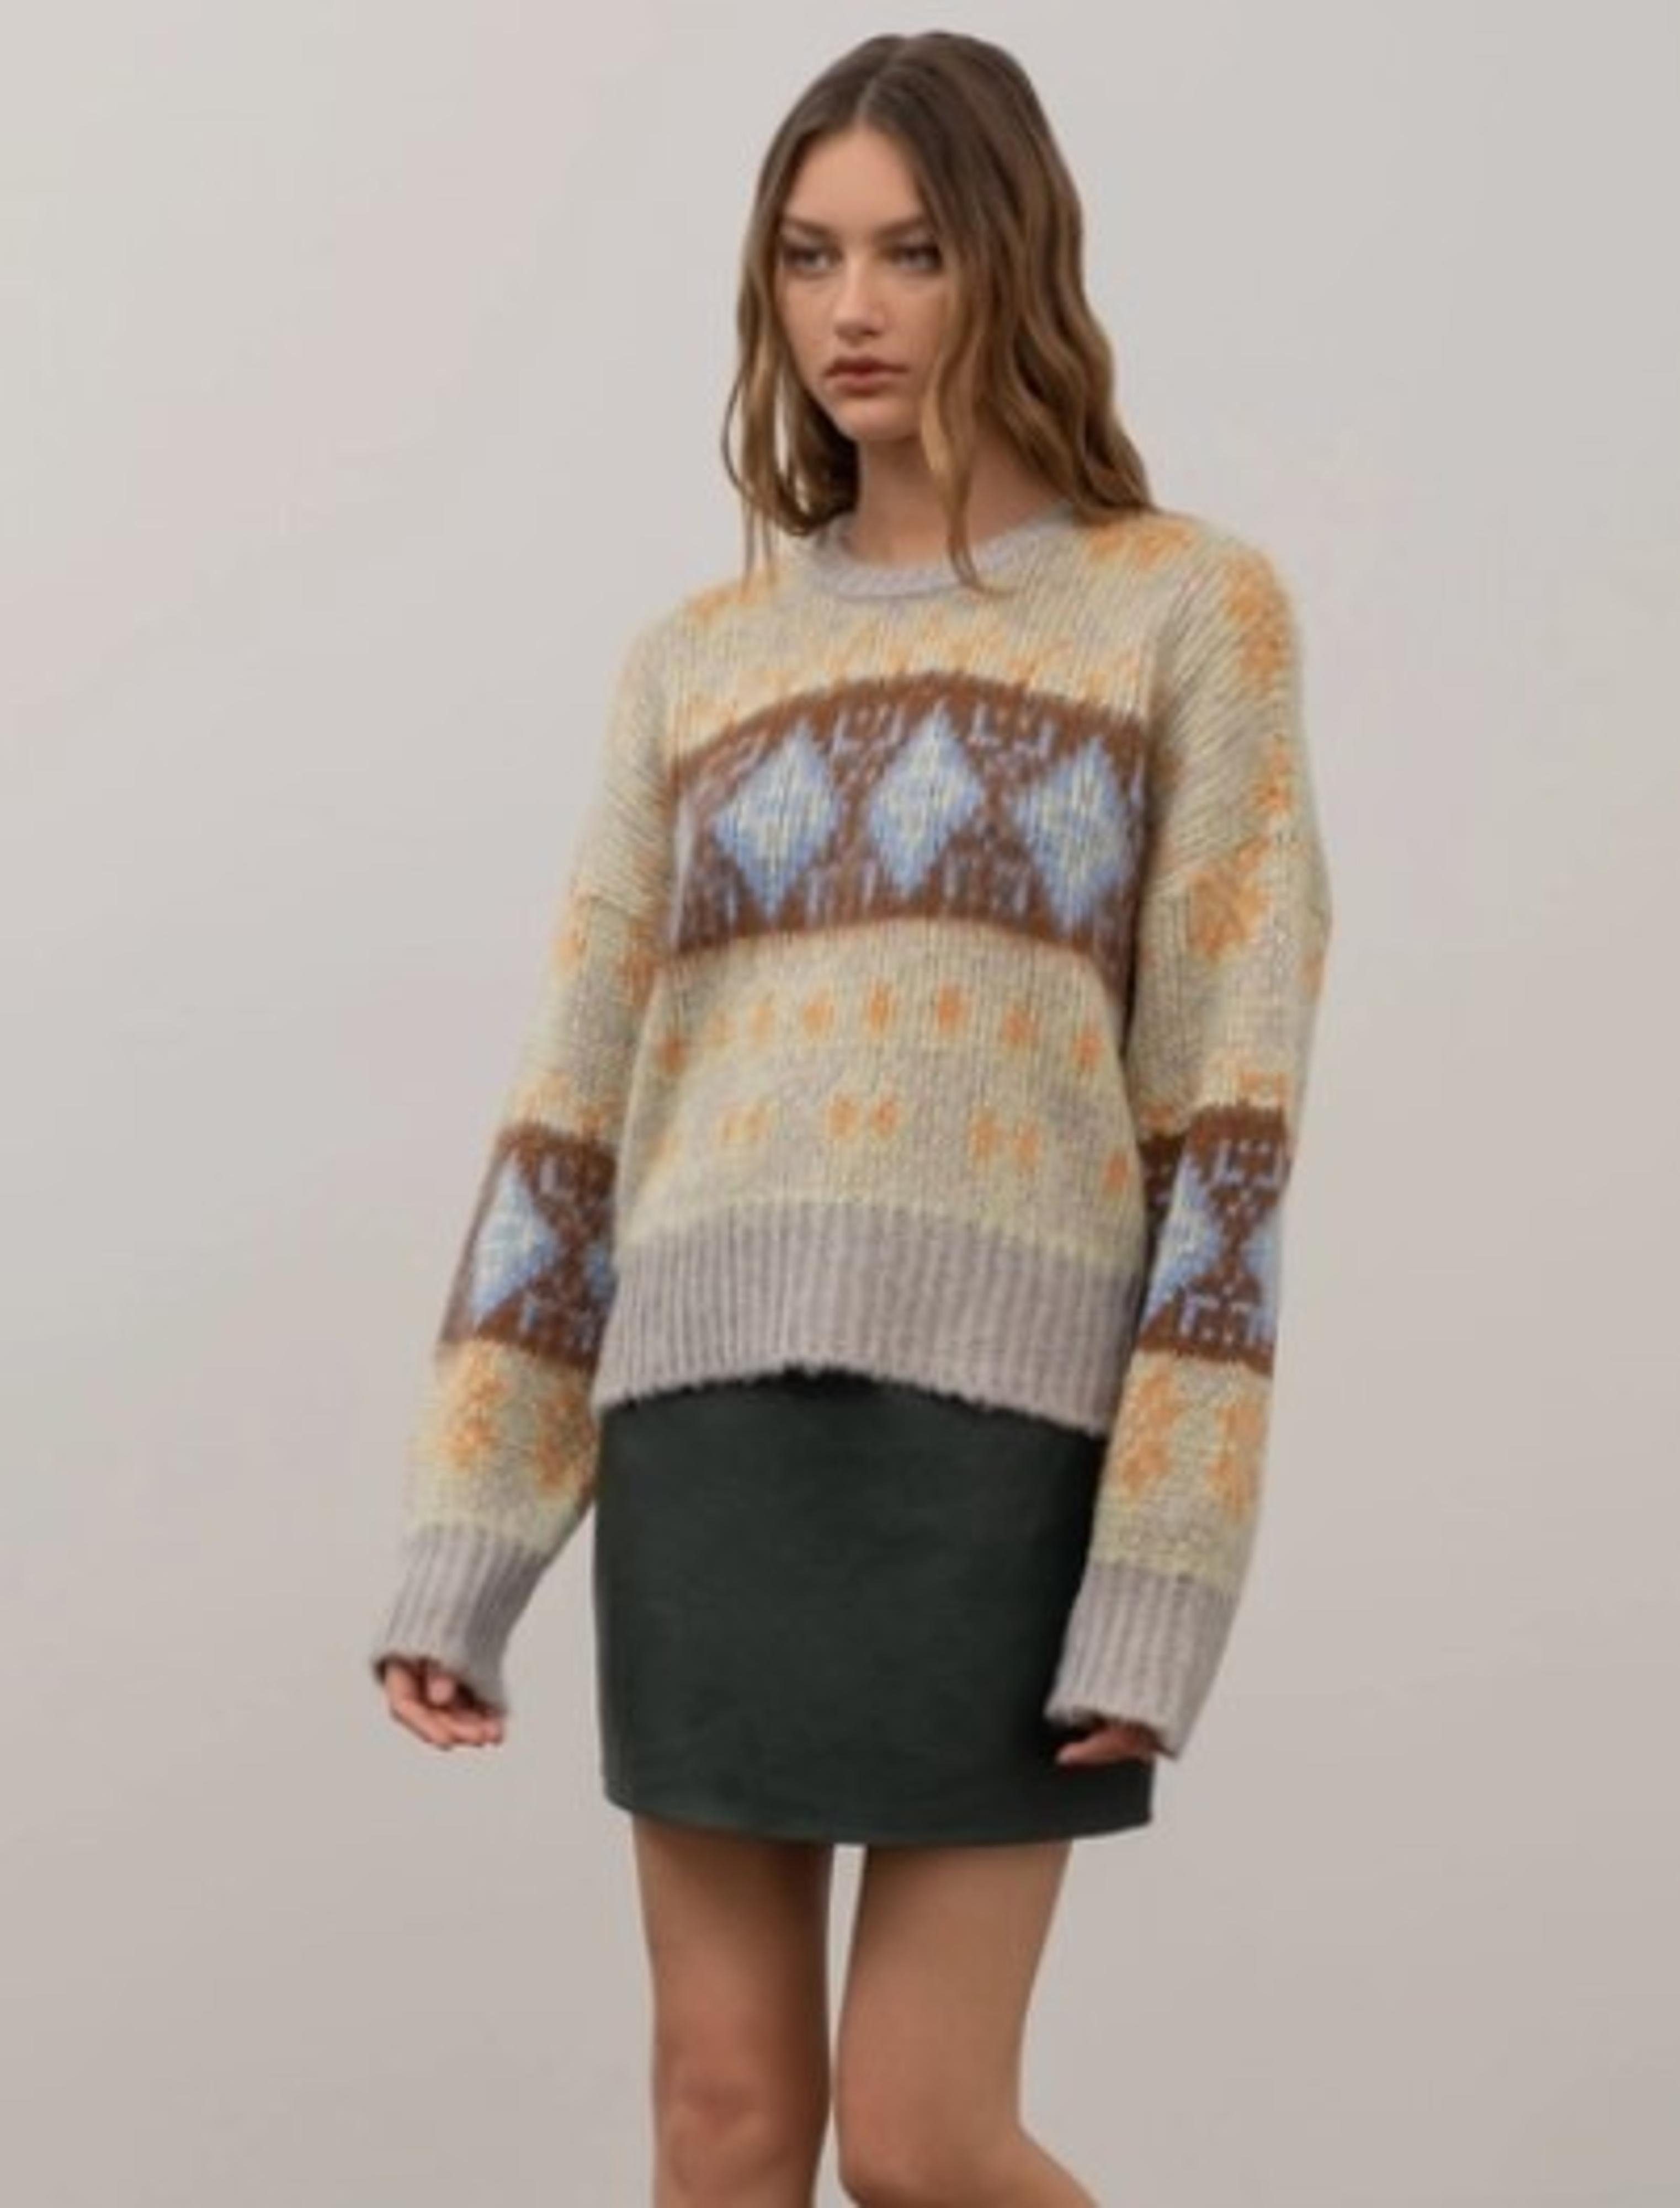  Covergirl Knit Sweater